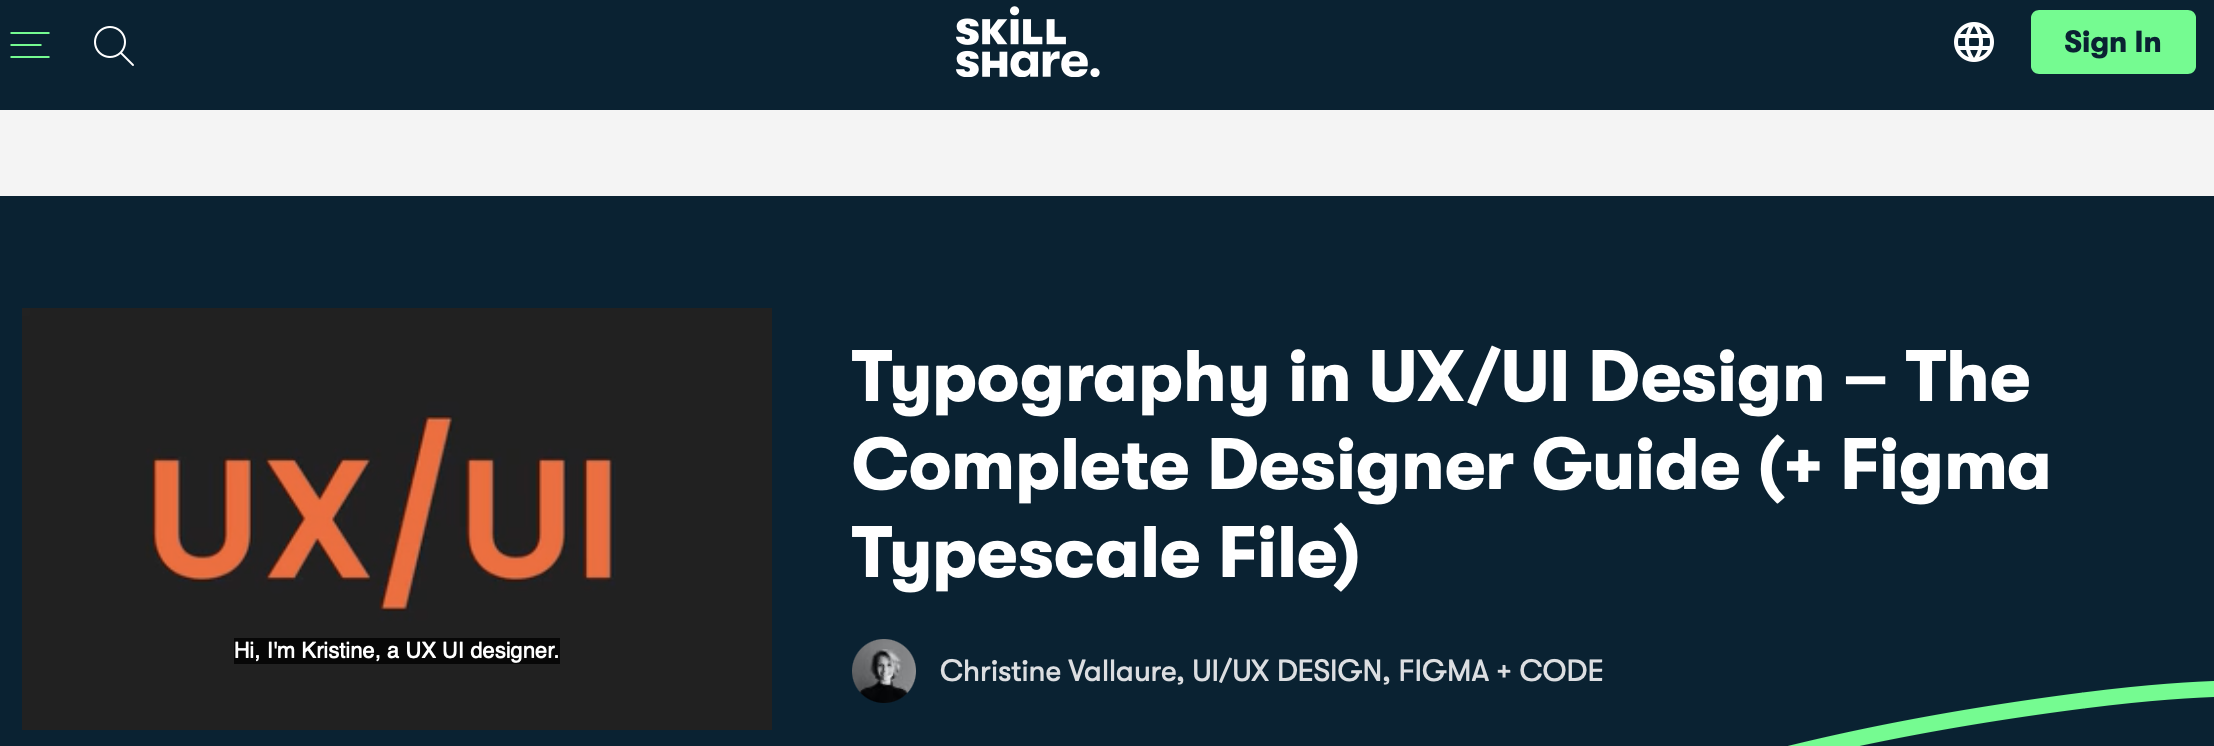 Typography in UI:UX Design - The Complete Designer Guide